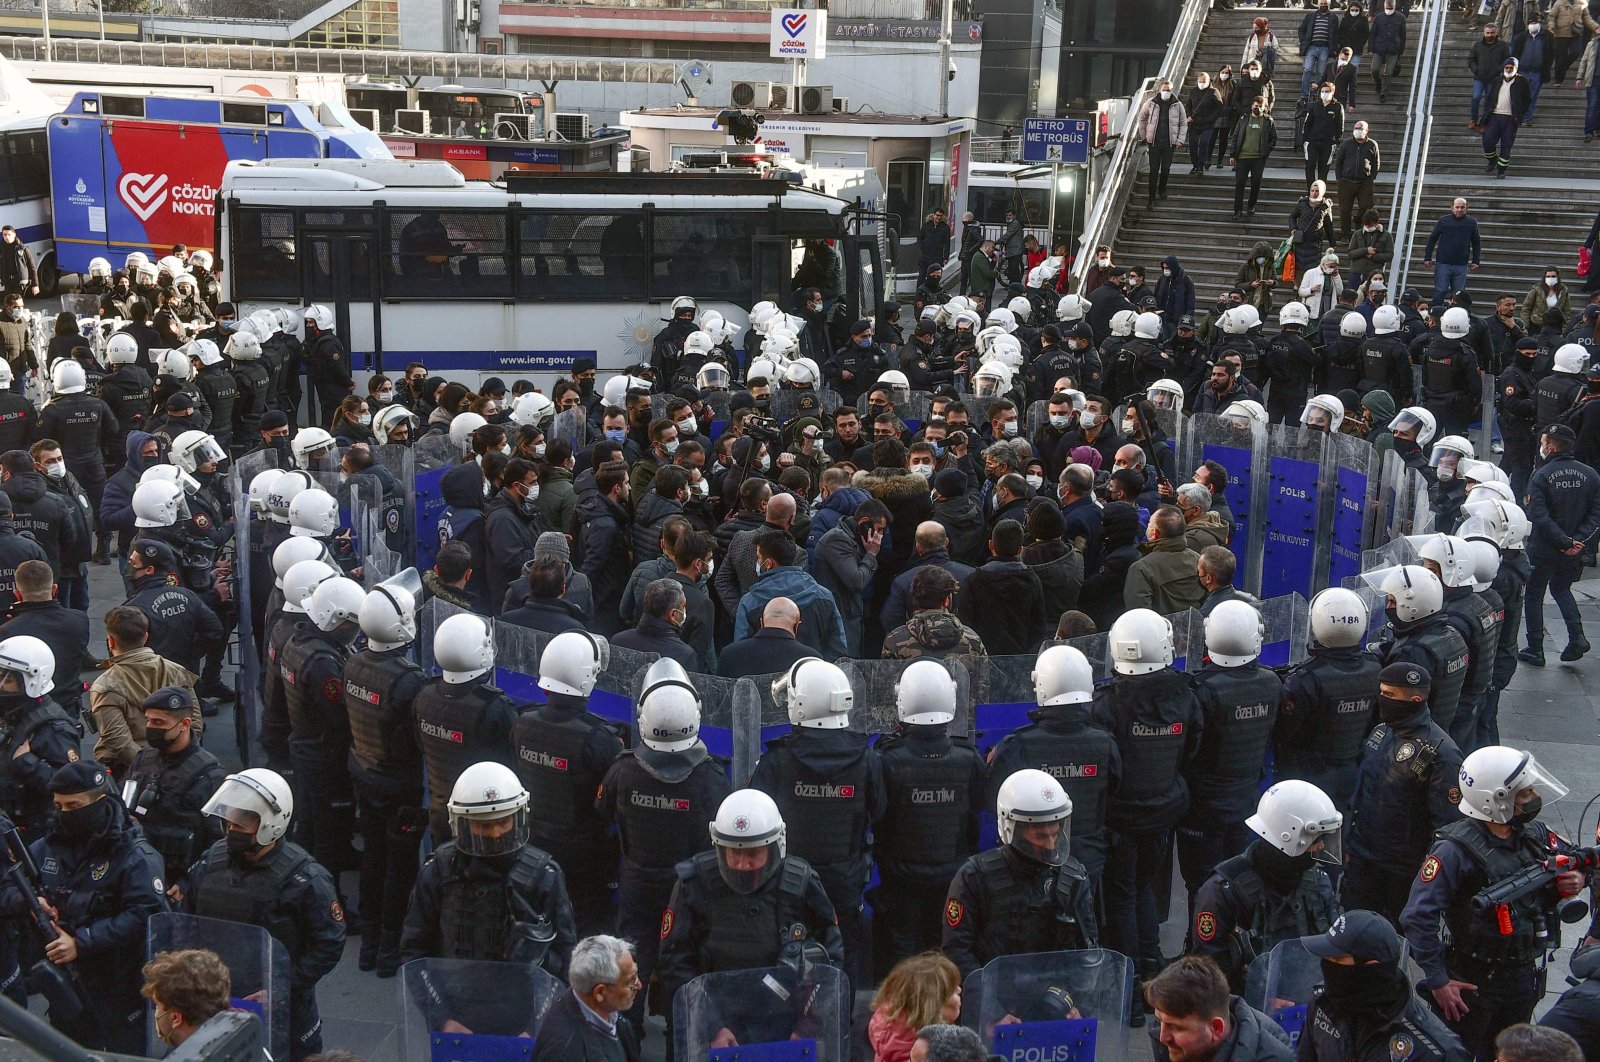 Turkish police surround protesters during a demonstration in support of jailed PKK leader Abdullah Öcalan in Istanbul, Turkey, Feb. 15, 2022. (AFP Photo)